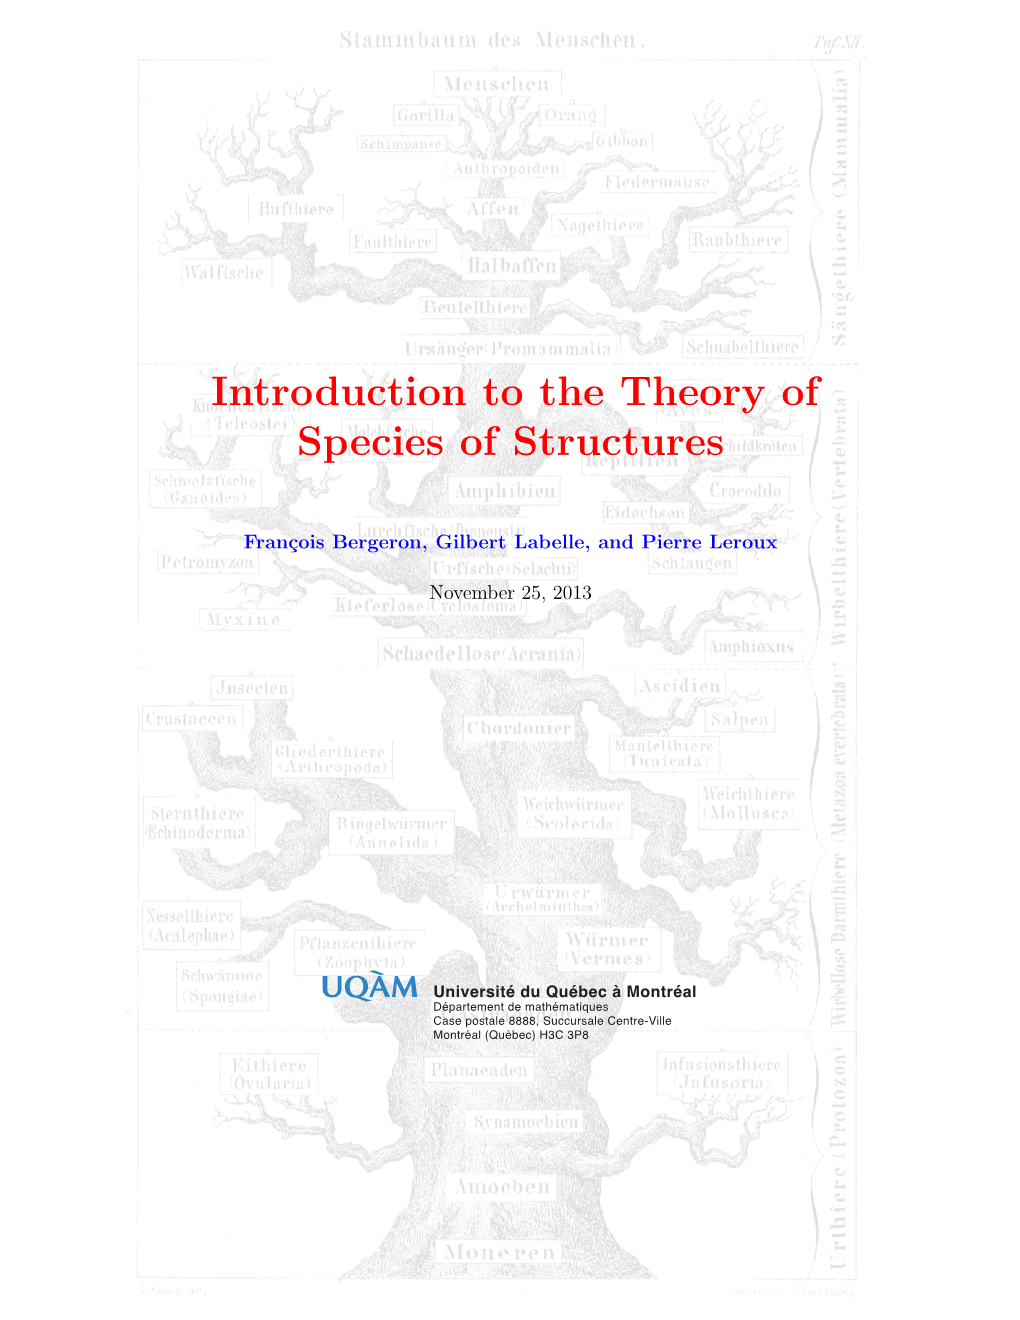 Introduction to the Theory of Species of Structures